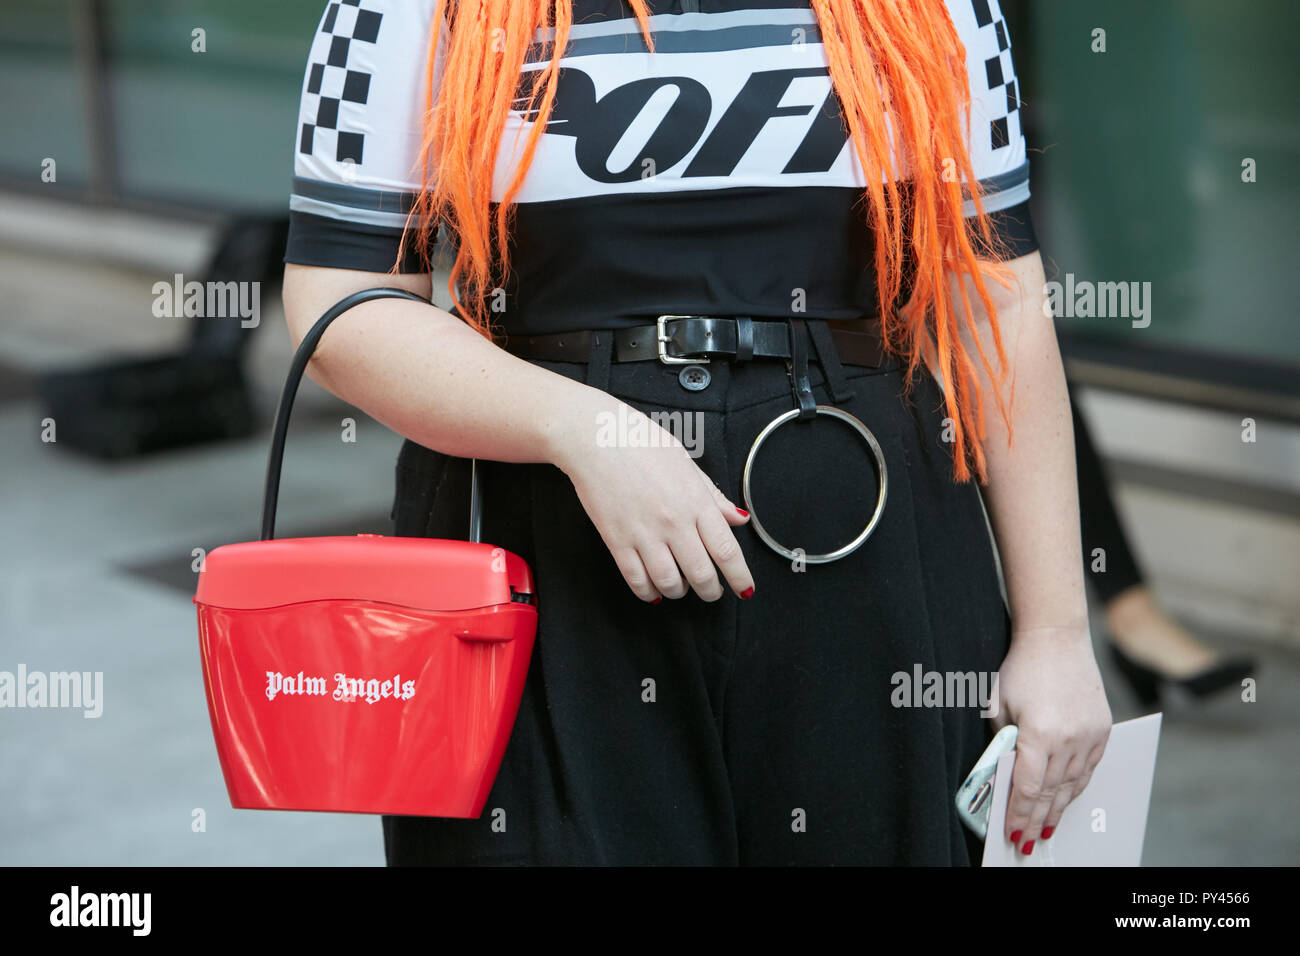 MILAN, ITALY - SEPTEMBER 23, 2018: Woman with red Palm Angels bag and orange hair before Giorgio Armani fashion show, Milan Fashion Week street style Stock Photo